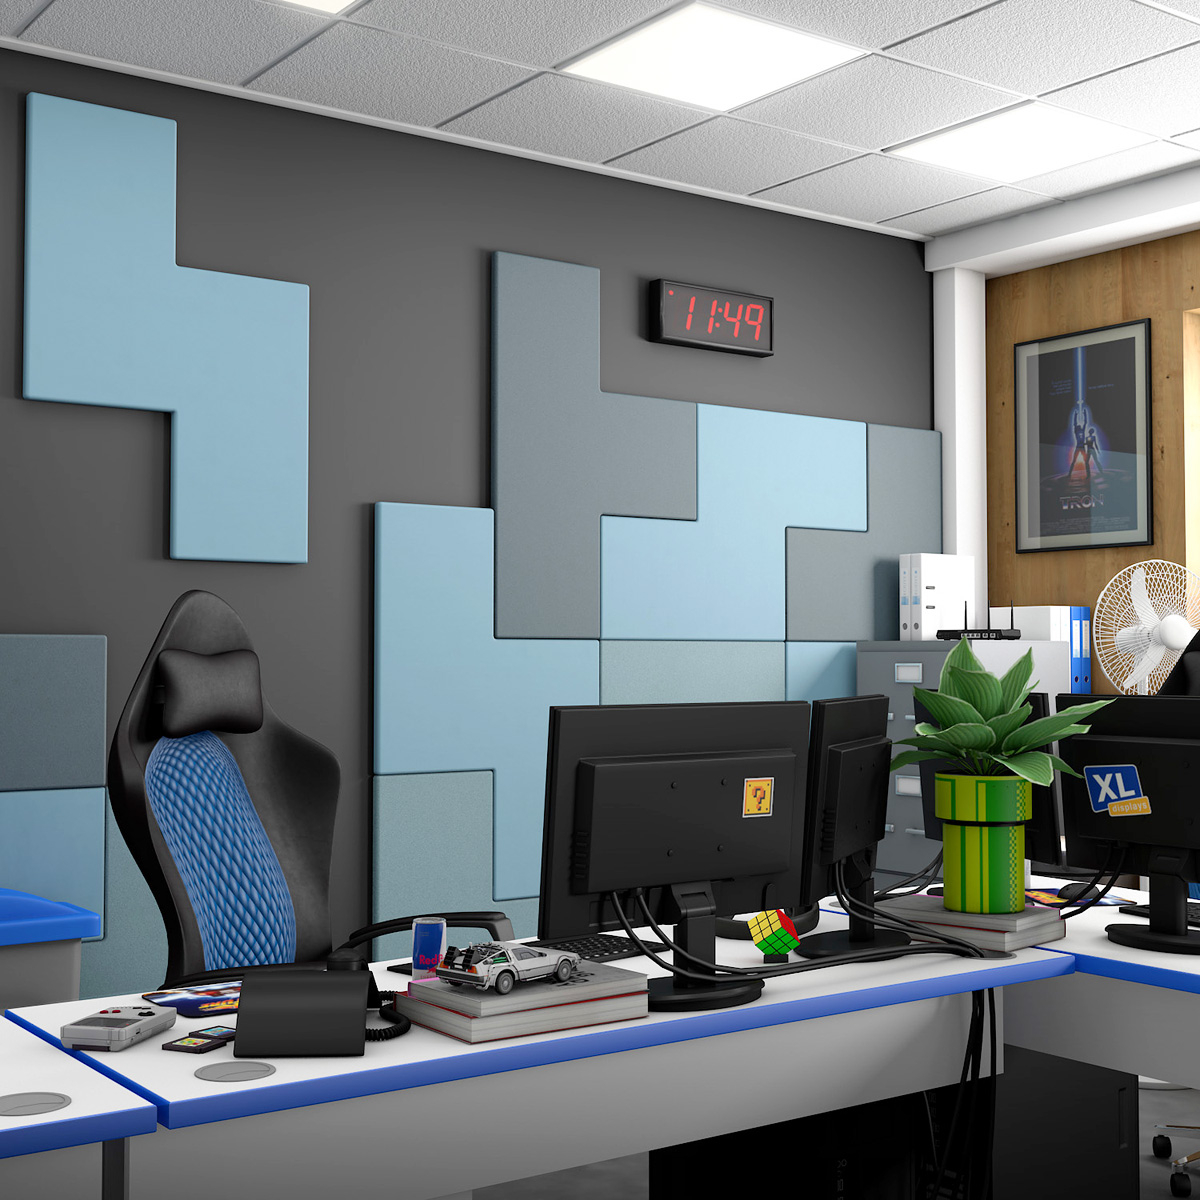 TETRATAK™ Interlocking Acoustic Soundproofing Panels Can Create Sound Absorbing Feature Walls